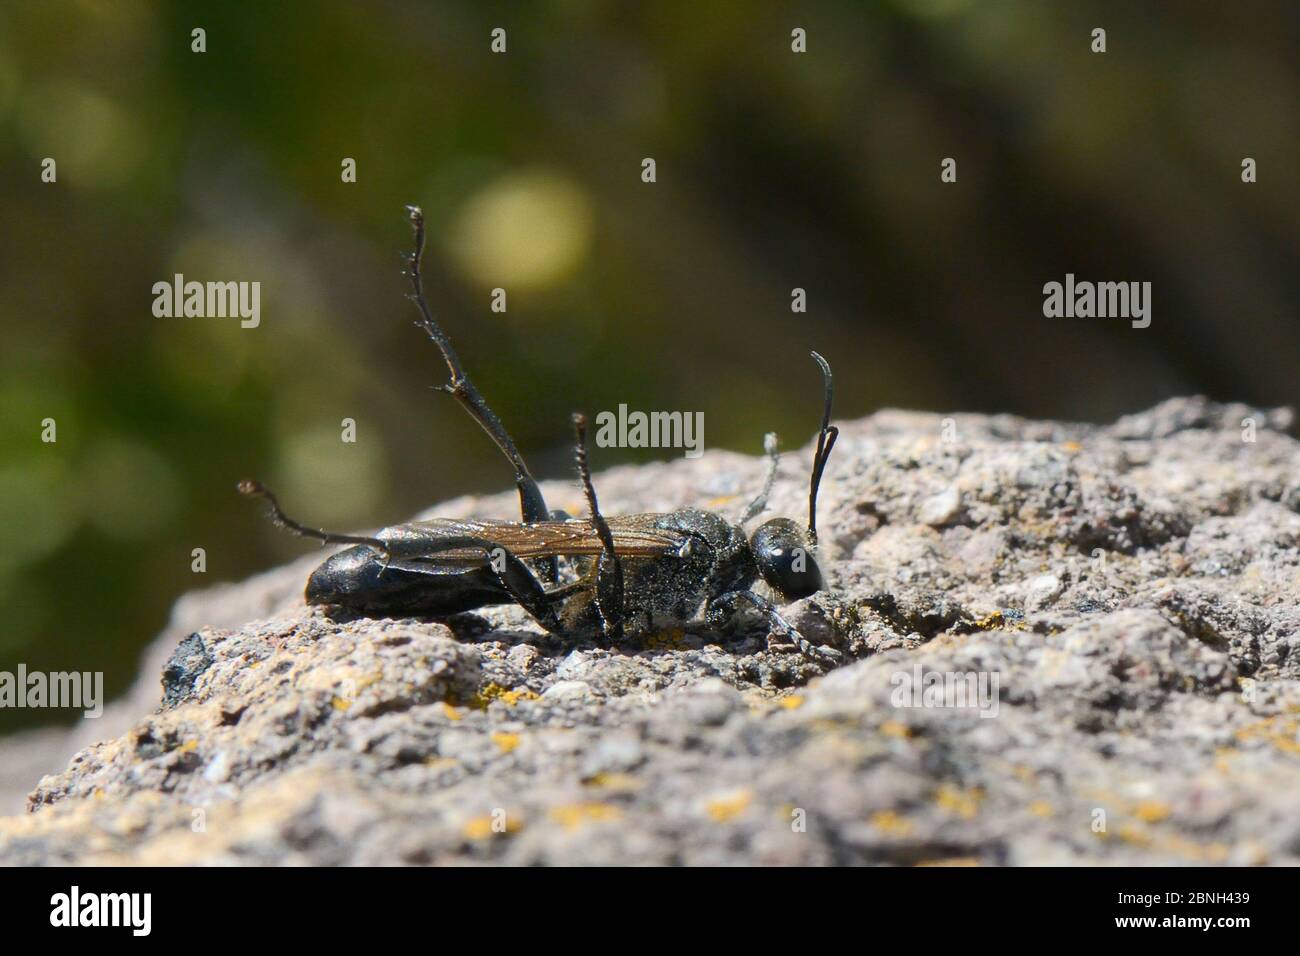 Digger wasp (Sphex pruinosus) male sunning on a rock in hot sunshine and raising its legs, Lesbos/ Lesvos, Greece, May Stock Photo